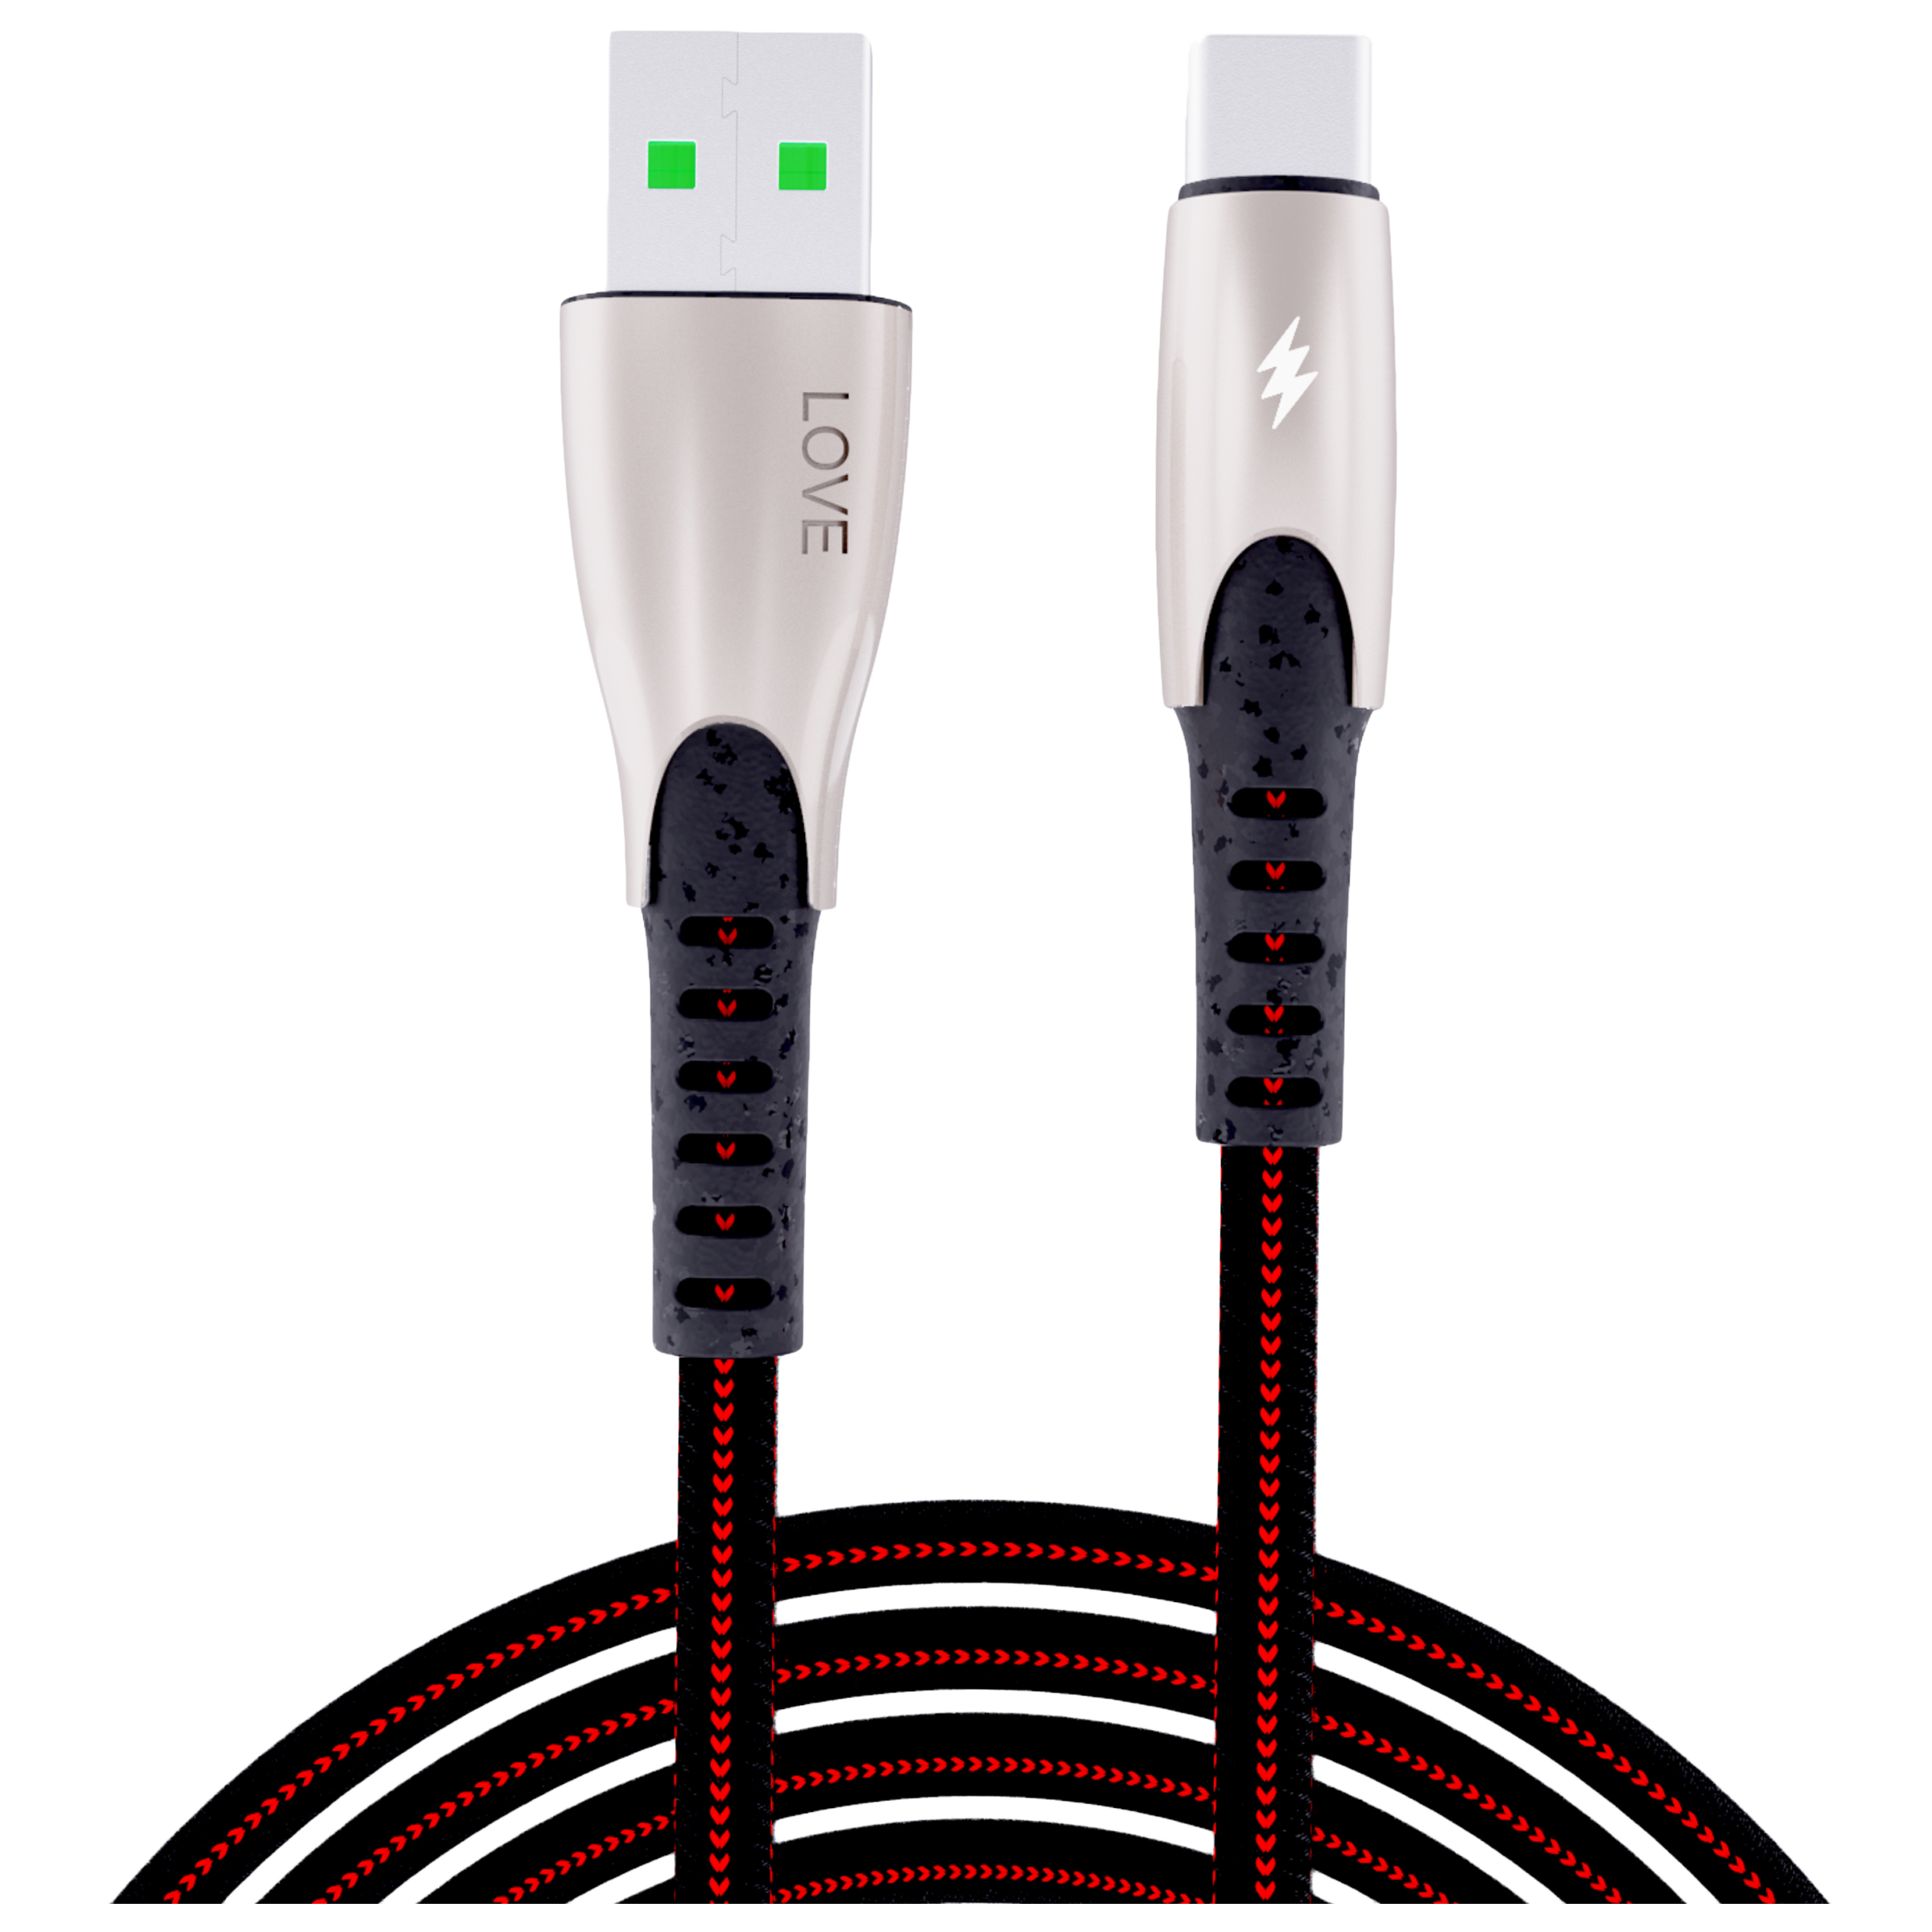 Back-Brainers Love TPE 1.2 Meter USB 2.0 (Type-A) to USB 3.0 (Type-C) Power/Charging USB Cable (Fast Charging Compatible, BB-12020, Black)_1